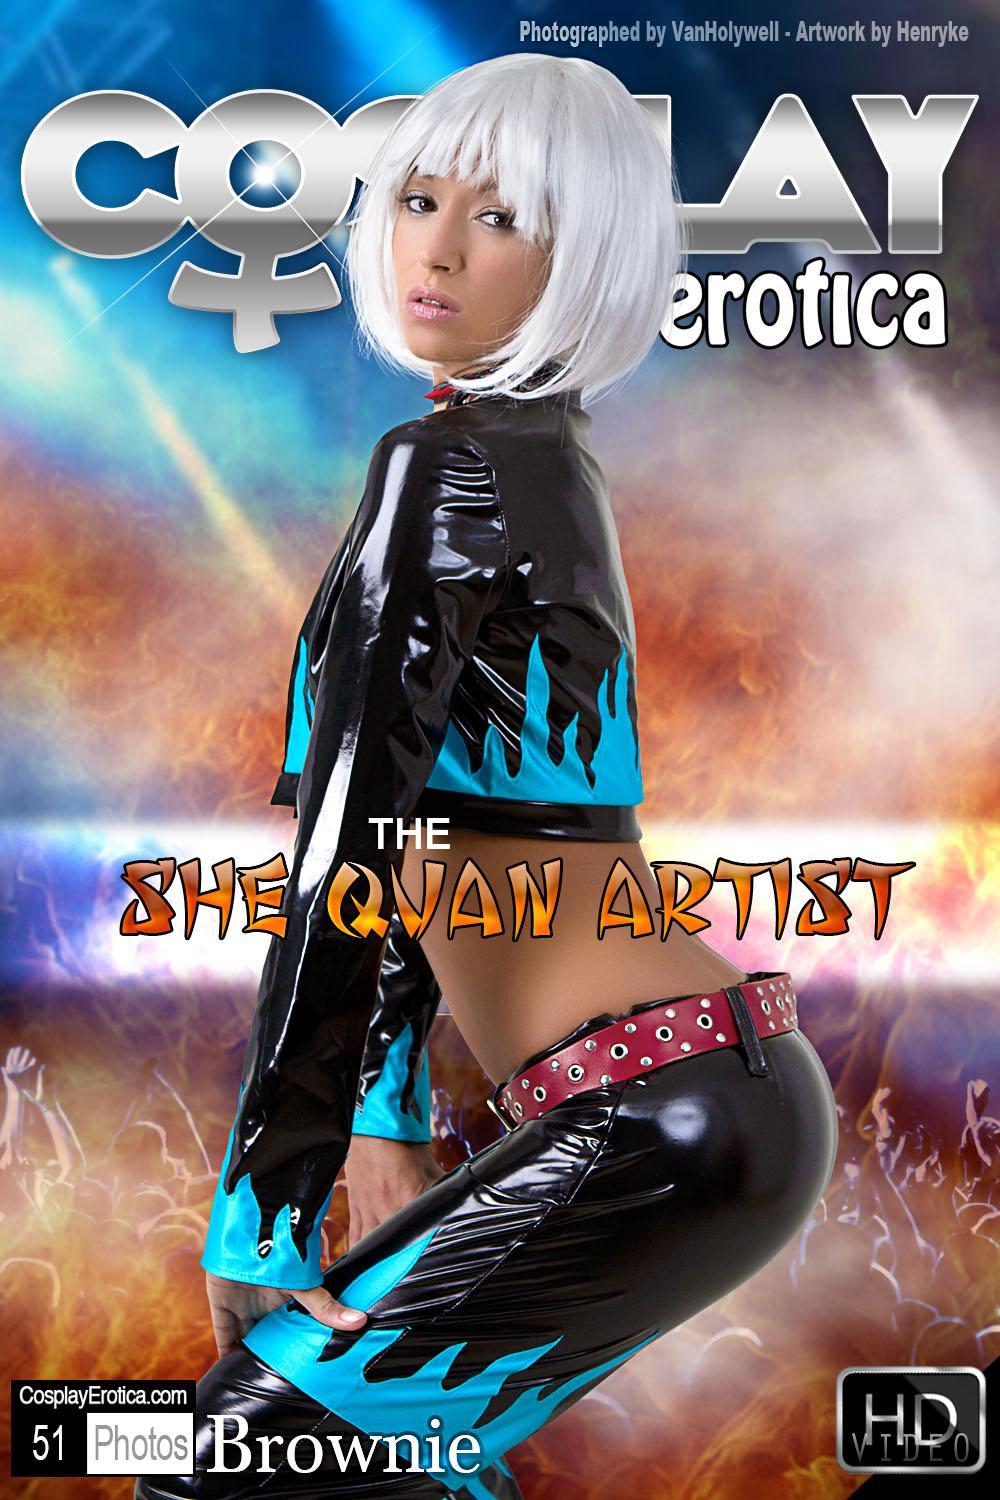 Cosplayer Brownie will kick ass in She Quan Artist